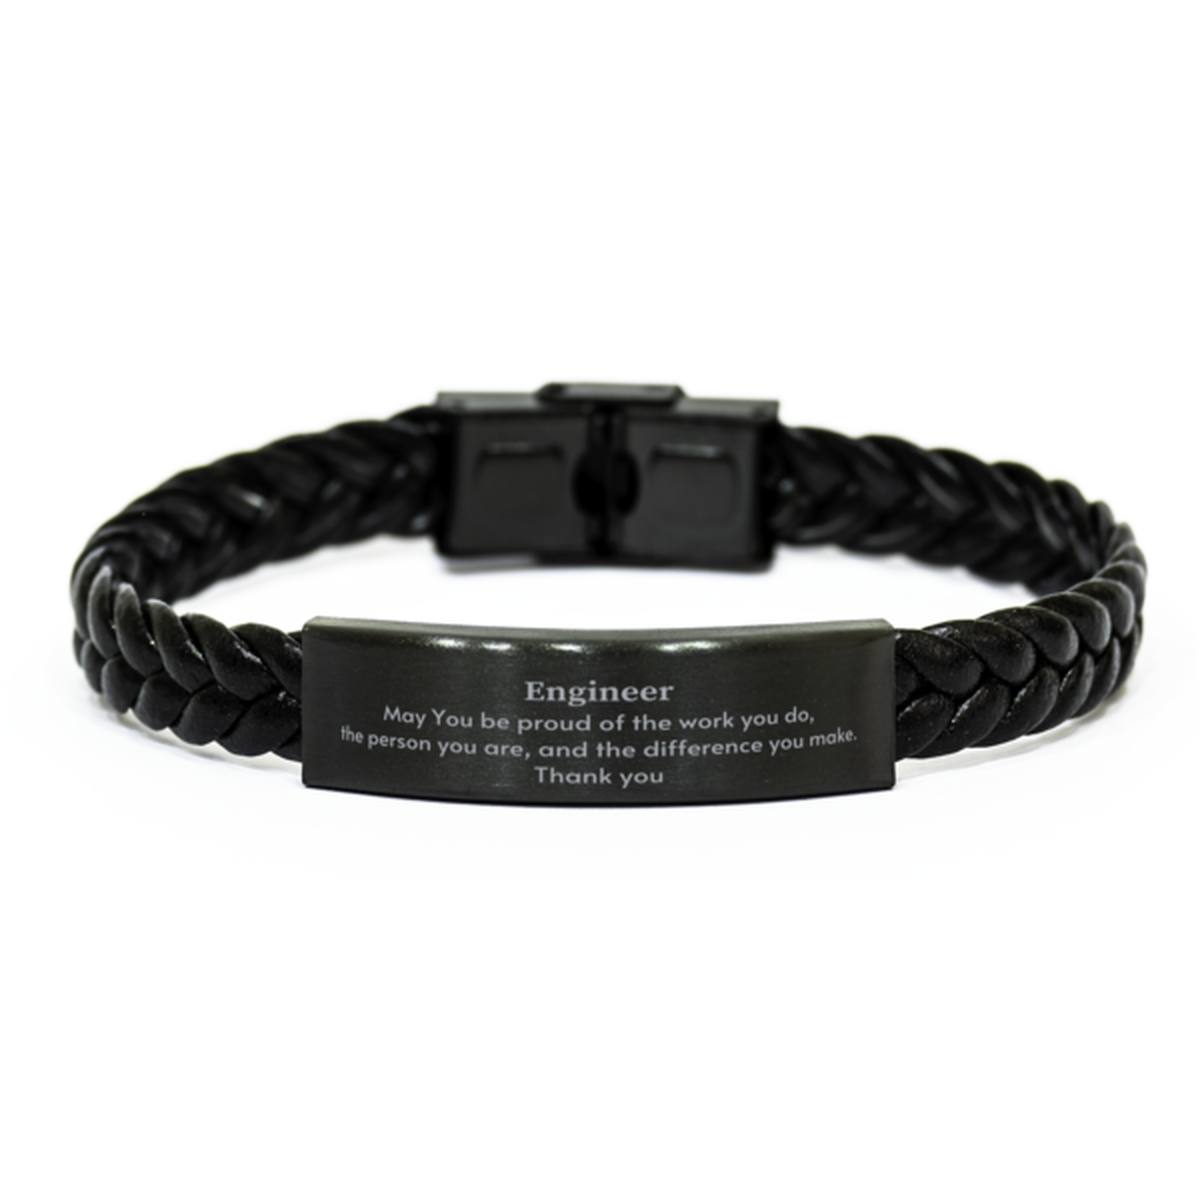 Heartwarming Braided Leather Bracelet Retirement Coworkers Gifts for Engineer, Engineer May You be proud of the work you do, the person you are Gifts for Boss Men Women Friends